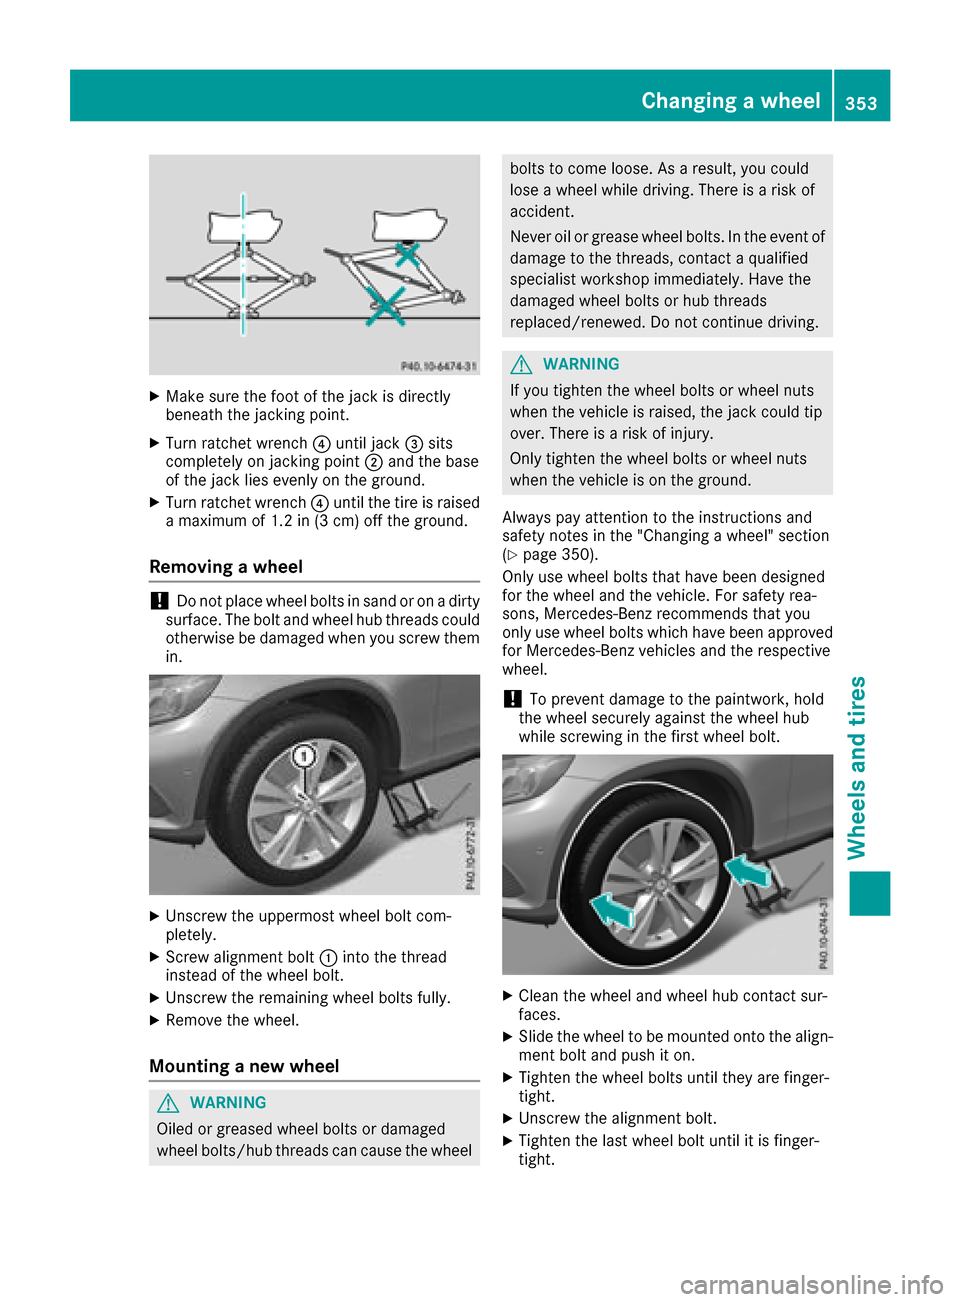 MERCEDES-BENZ GLC COUPE 2017 X253 Owners Manual XMake sure the foot of the jack is directly
beneath the jacking point.
XTurn ratchet wrench?until jack =sits
completely on jacking point ;and the base
of the jack lies evenly on the ground.
XTurn ratc